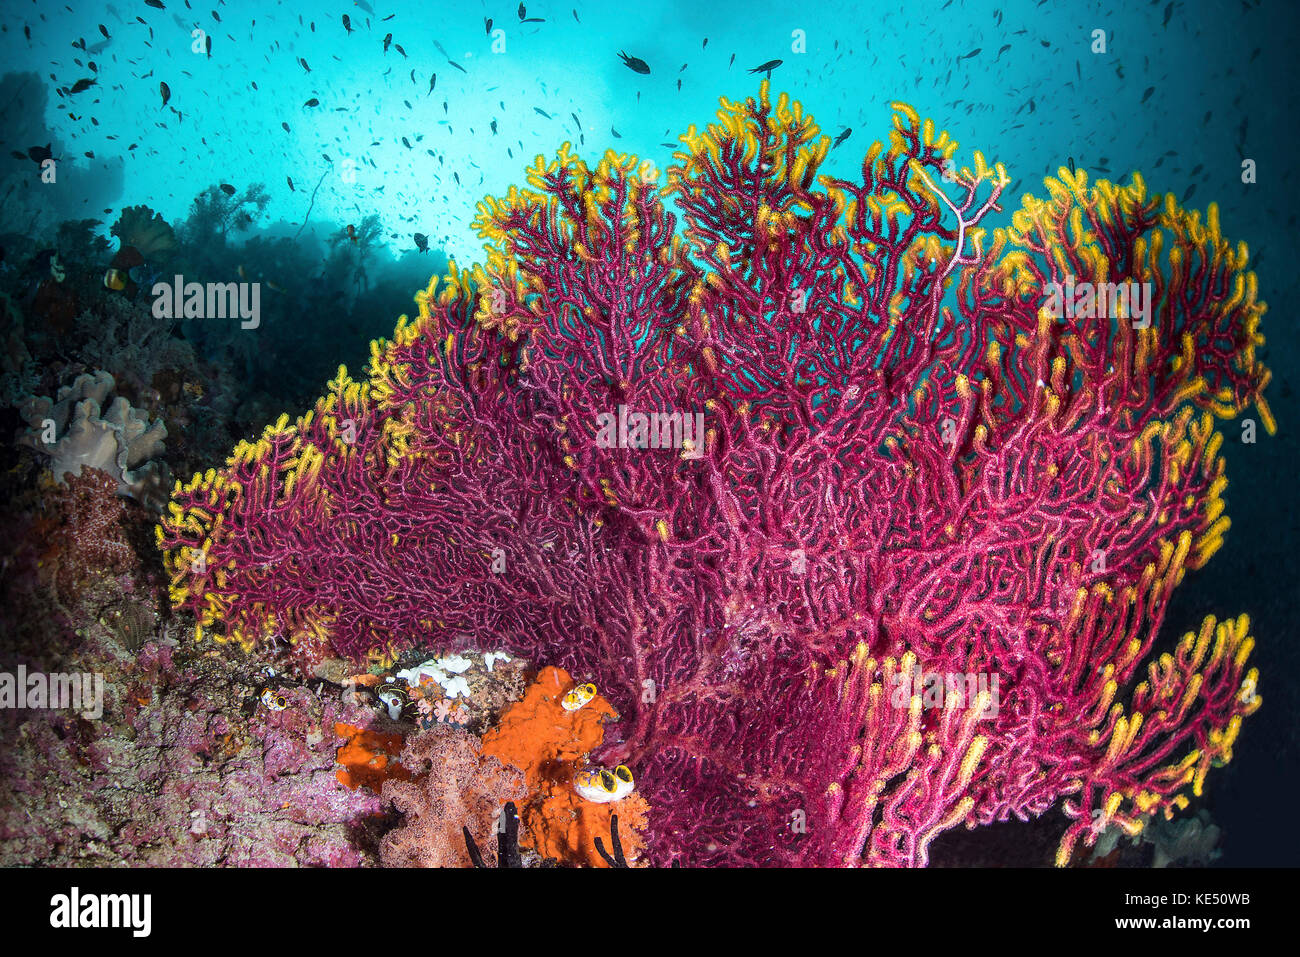 A purple sea fan is adorned with yellow fringe on a coral reef. Stock Photo